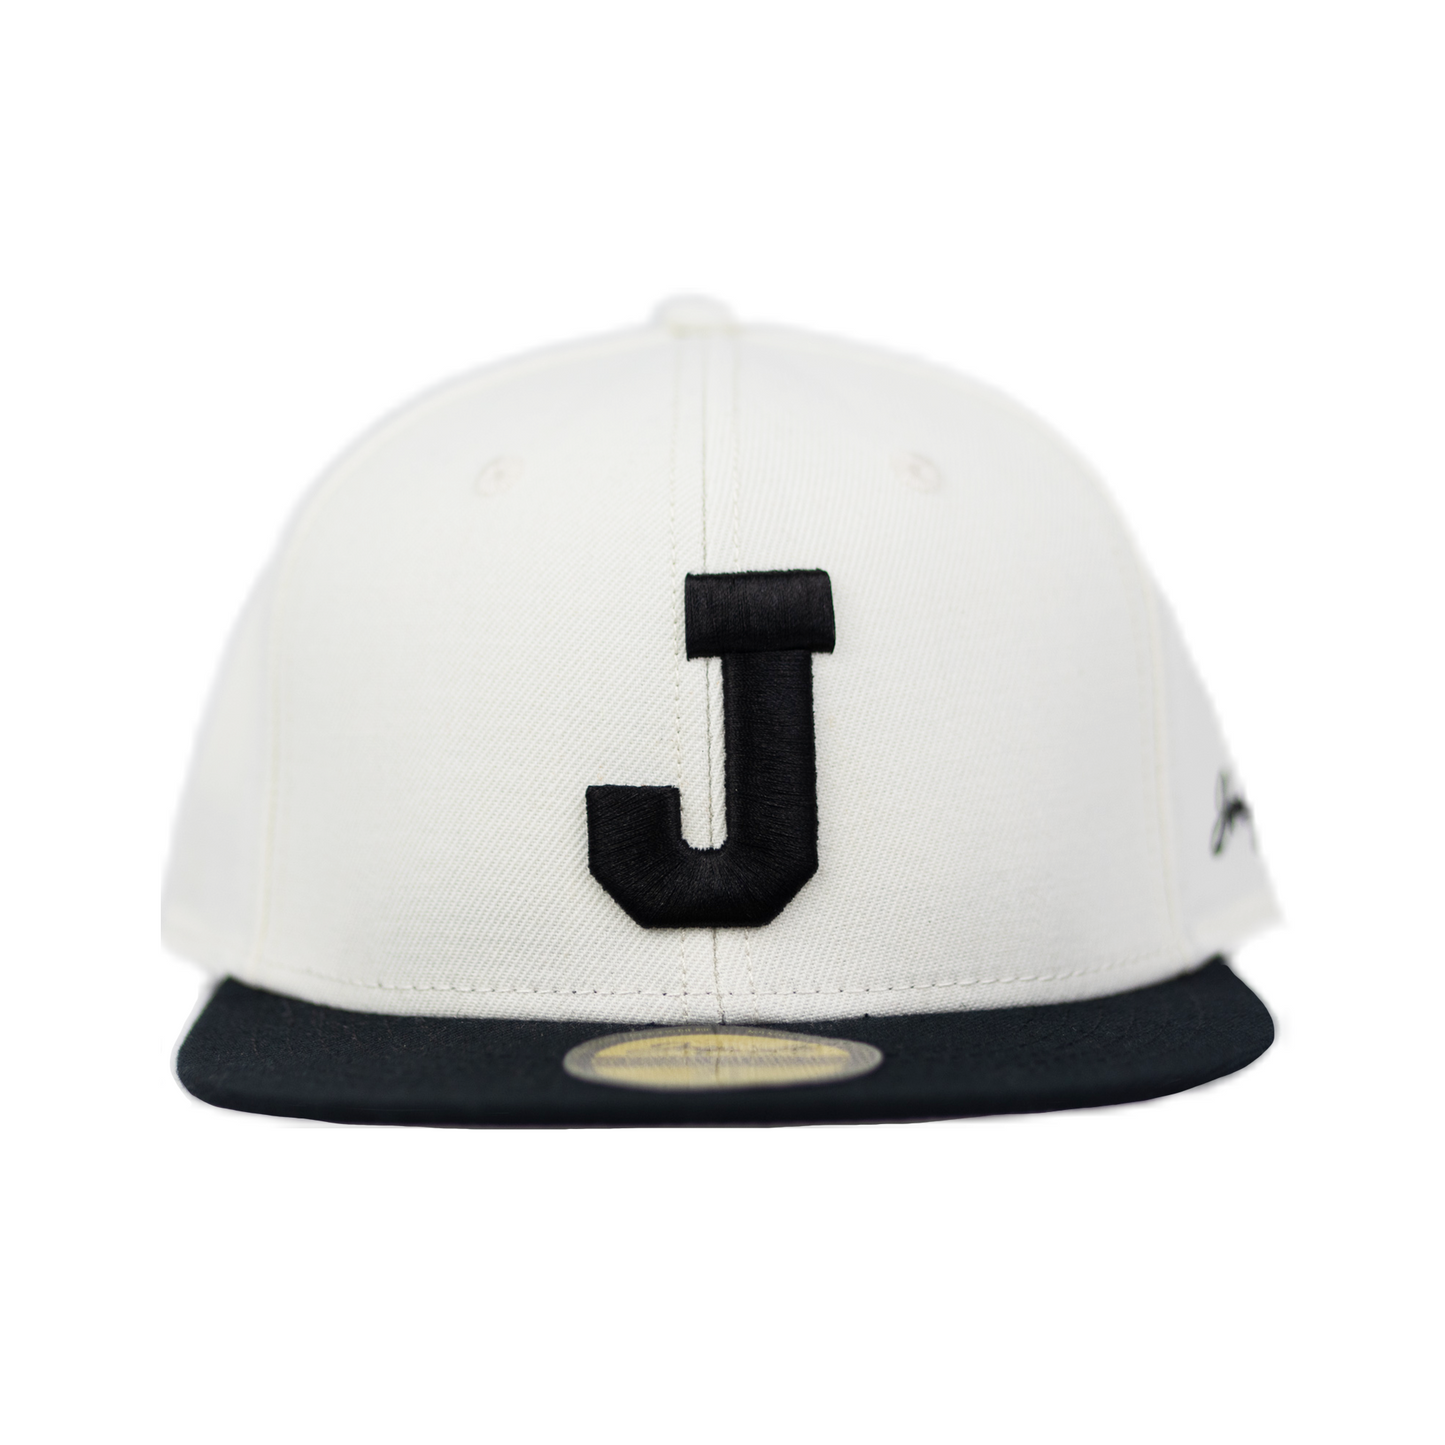 J FITTED HAT (TWO-TONE)